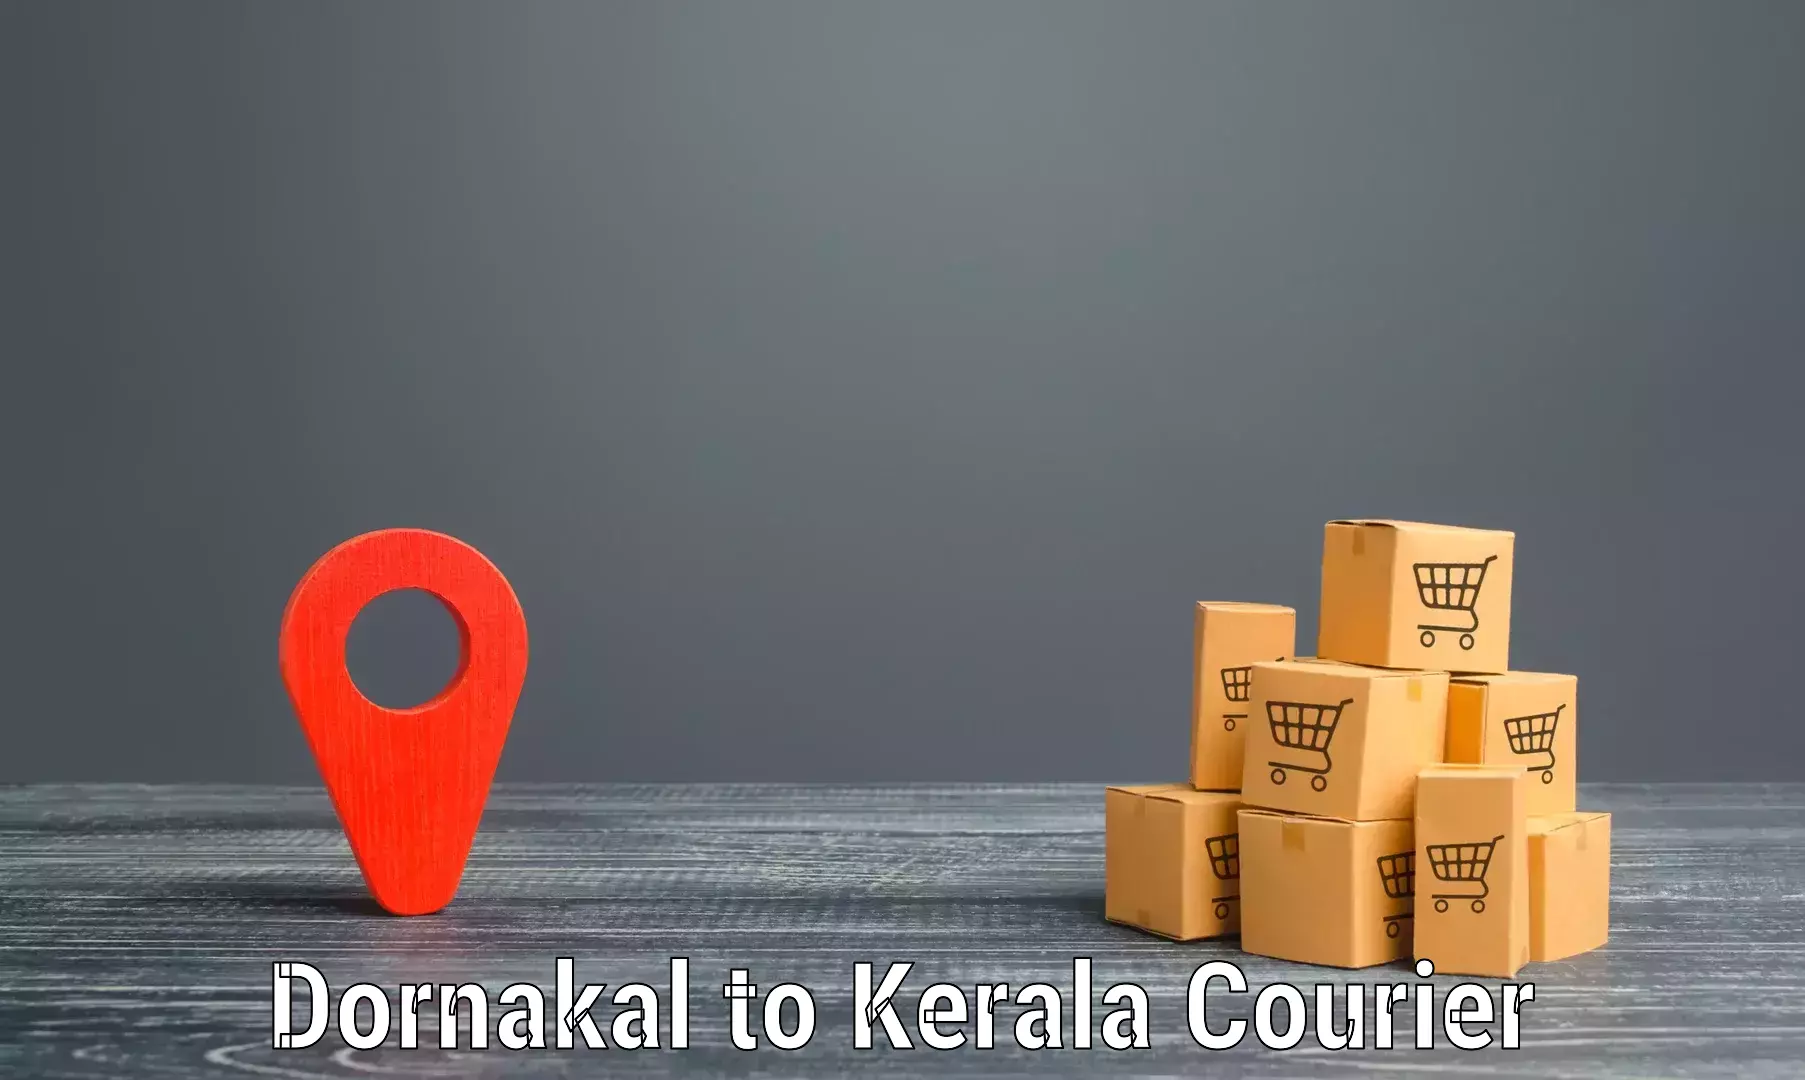 State-of-the-art courier technology Dornakal to Guruvayoor